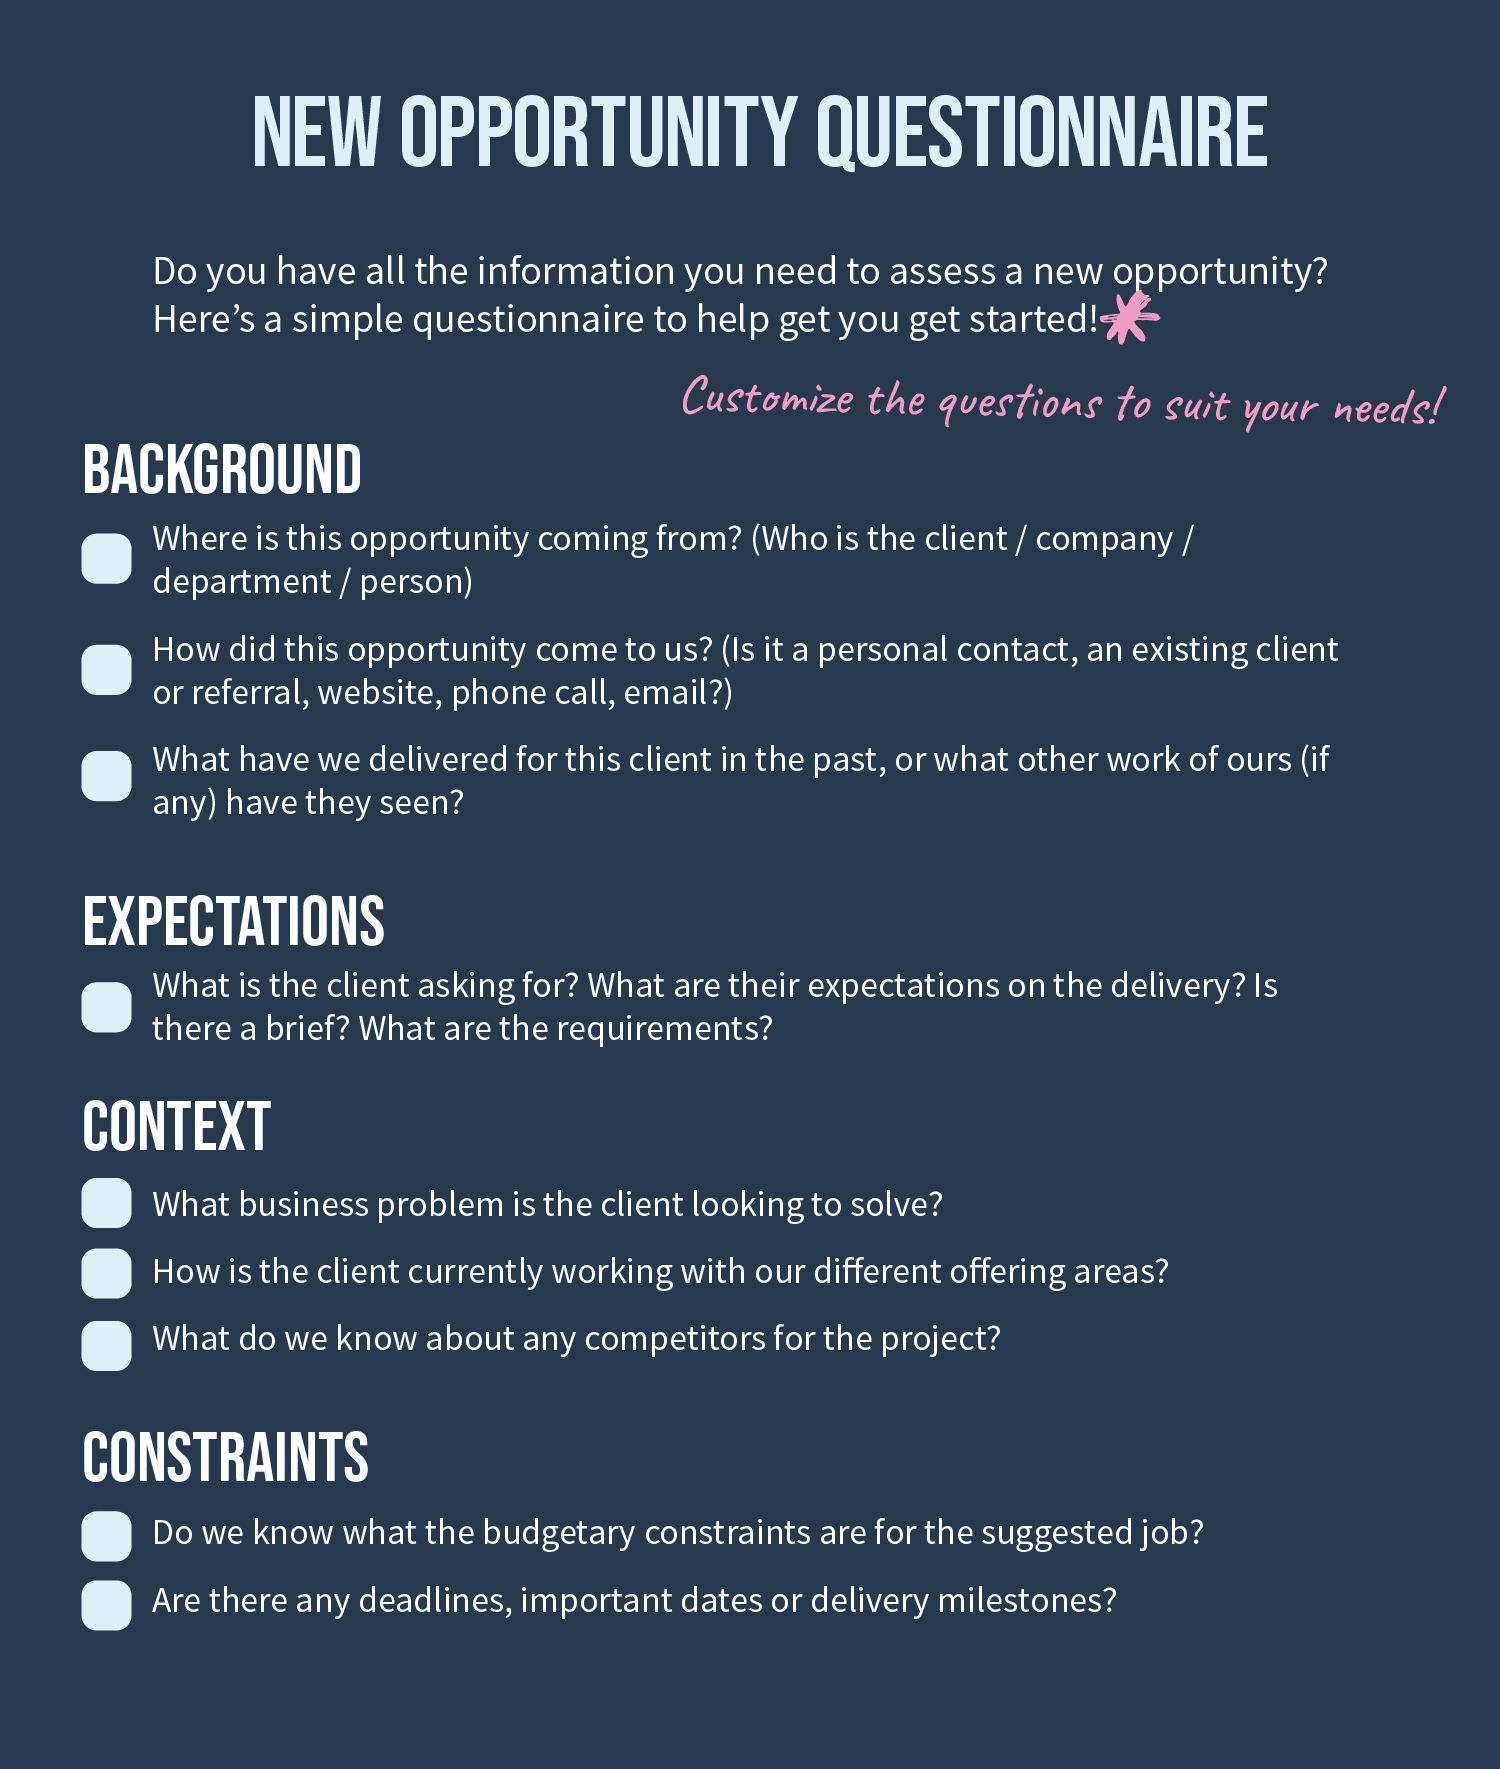 NM-opportunity-question-checklist